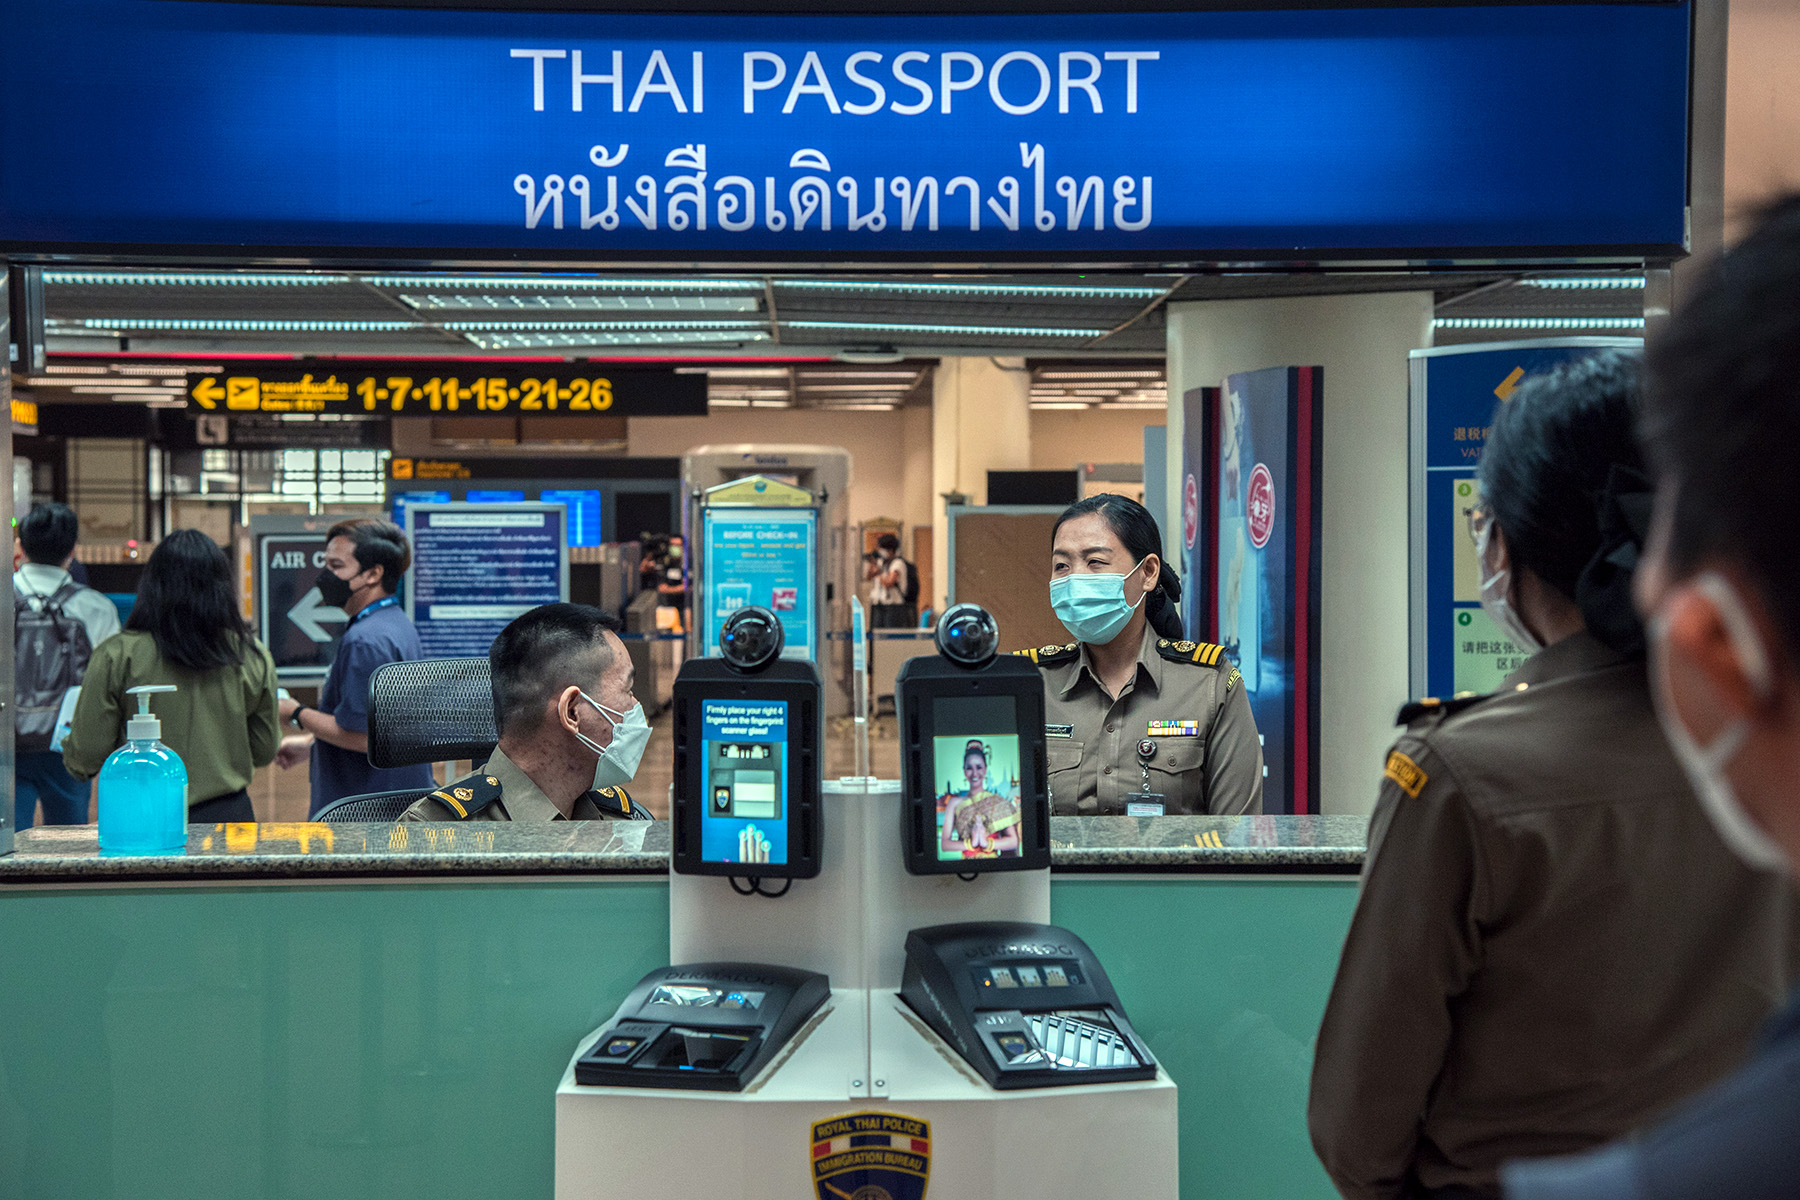 People standing in line for the passport check at Don Muang International Airport in Bangkok, Thailand. Everyone is wearing face masks.